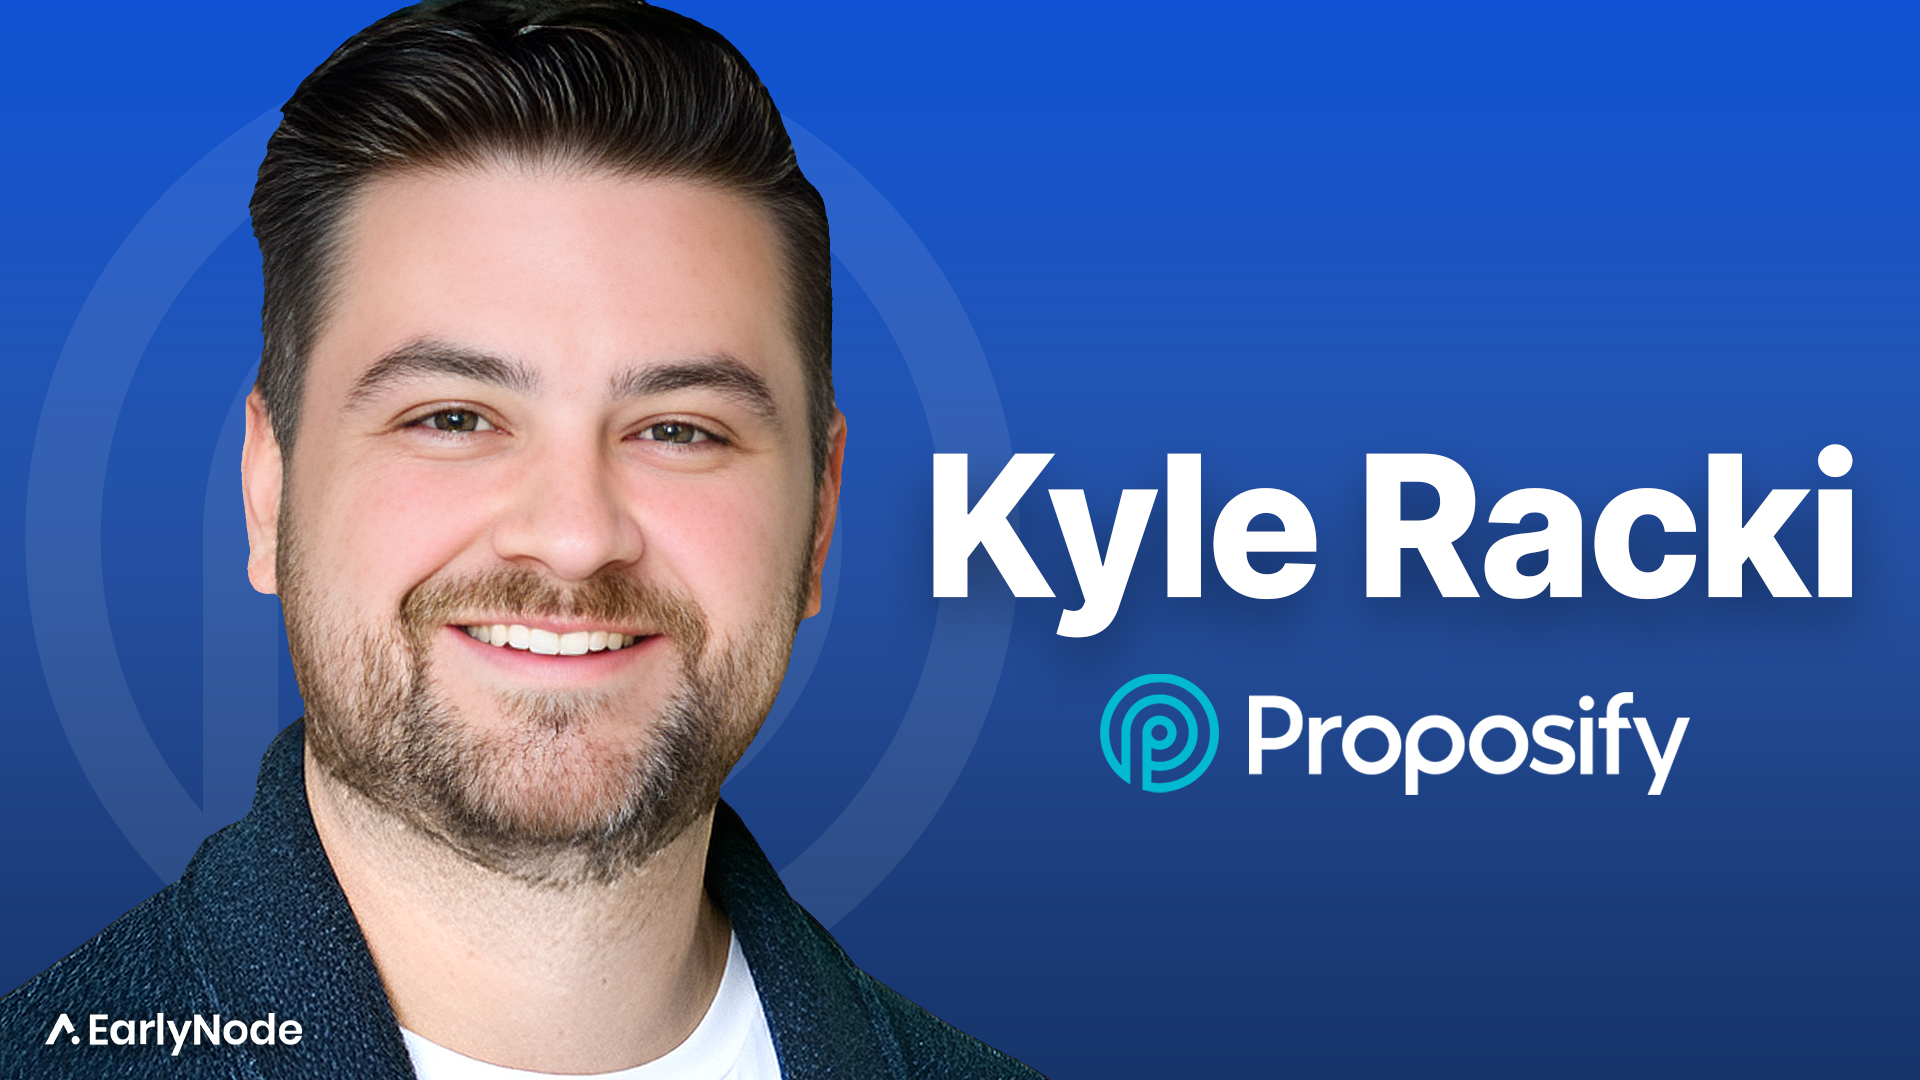 From $0 to $11M, How Kyle Racki grew Proposify to One of the Best Sales Document Automation Tools